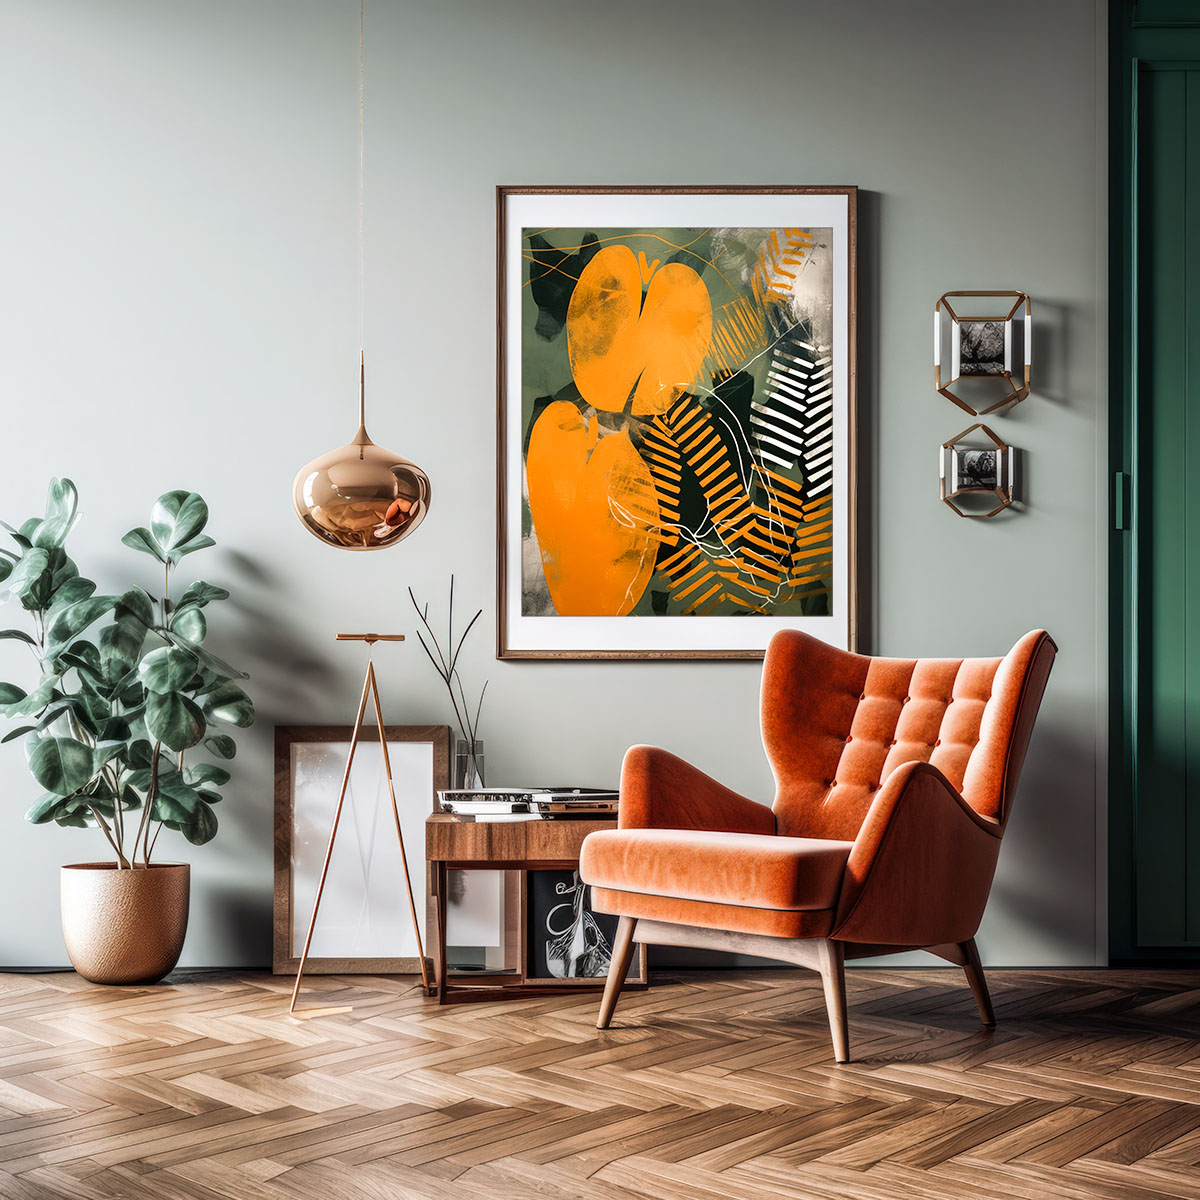 Modern interior in mid century style with burnt orange armchair and tropical leaf wall art